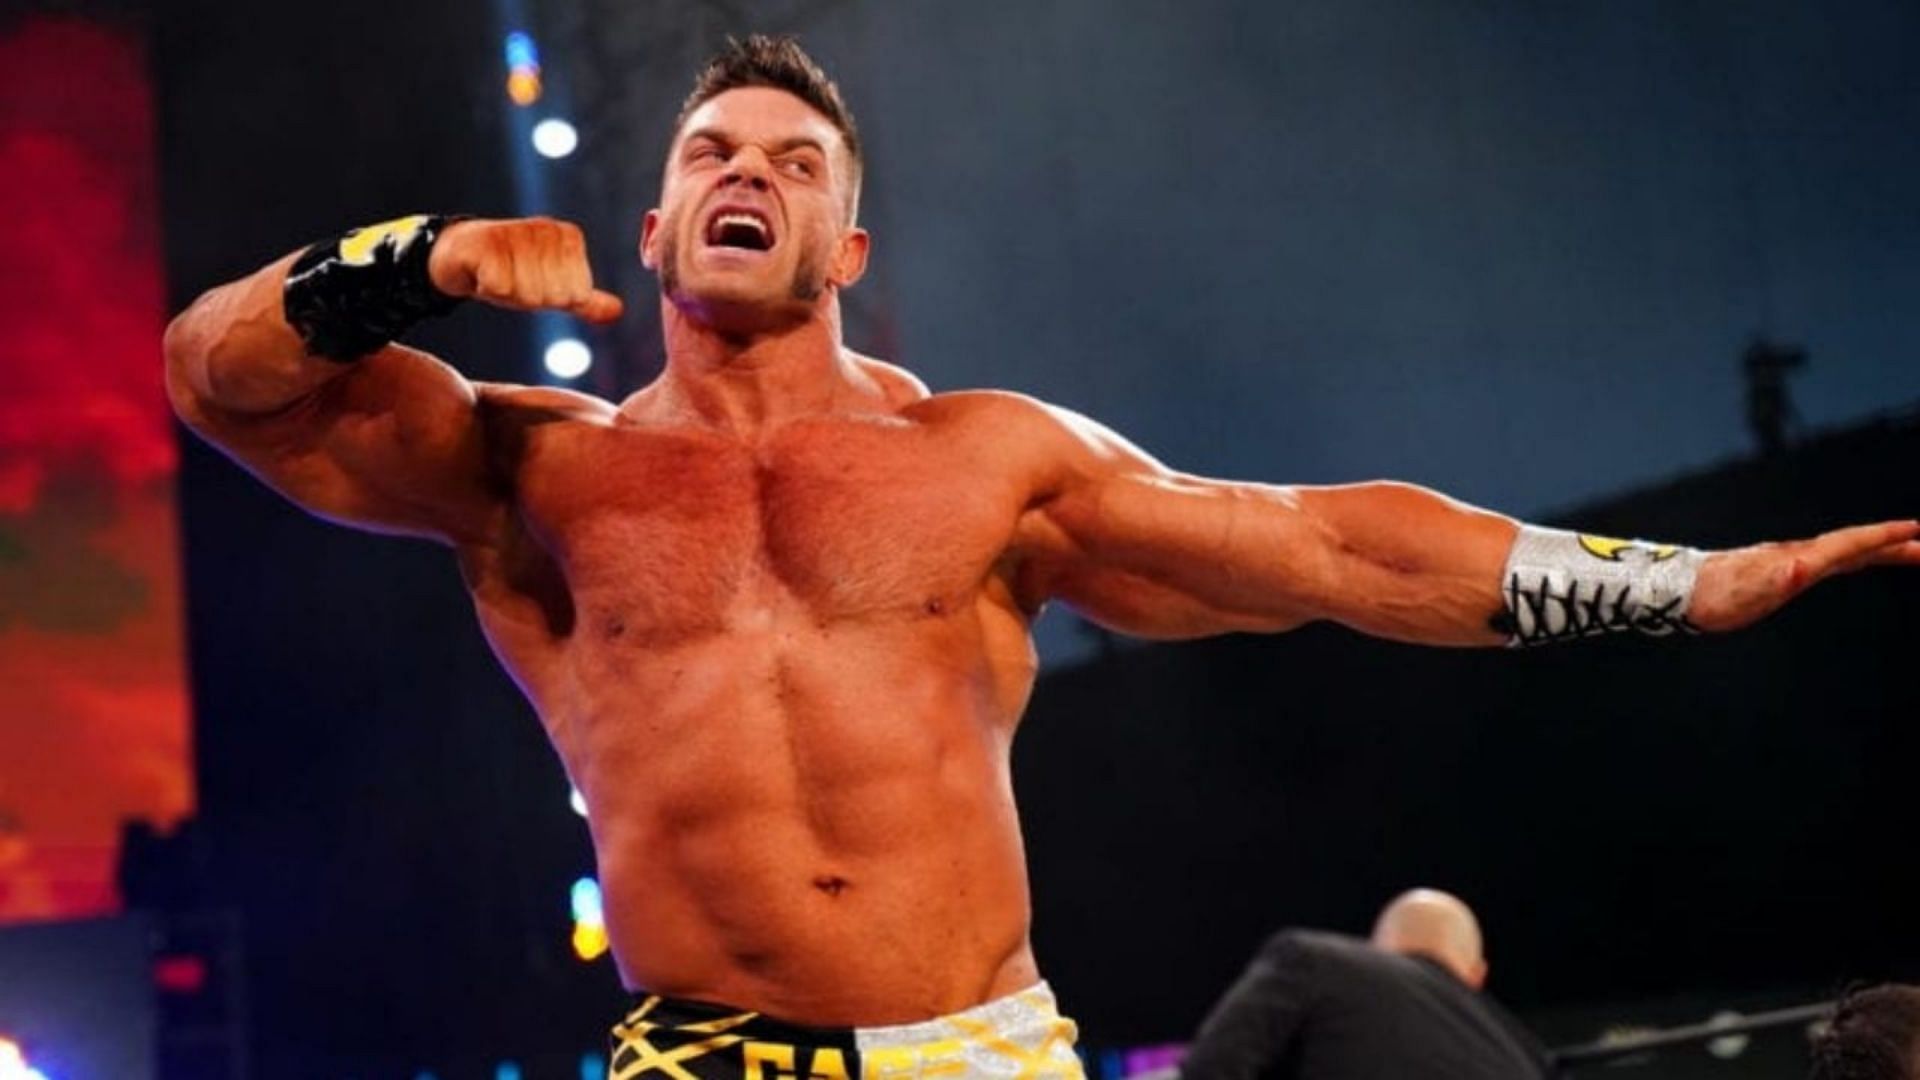 Brian Cage has had a tumultuous time with All Elite Wrestling